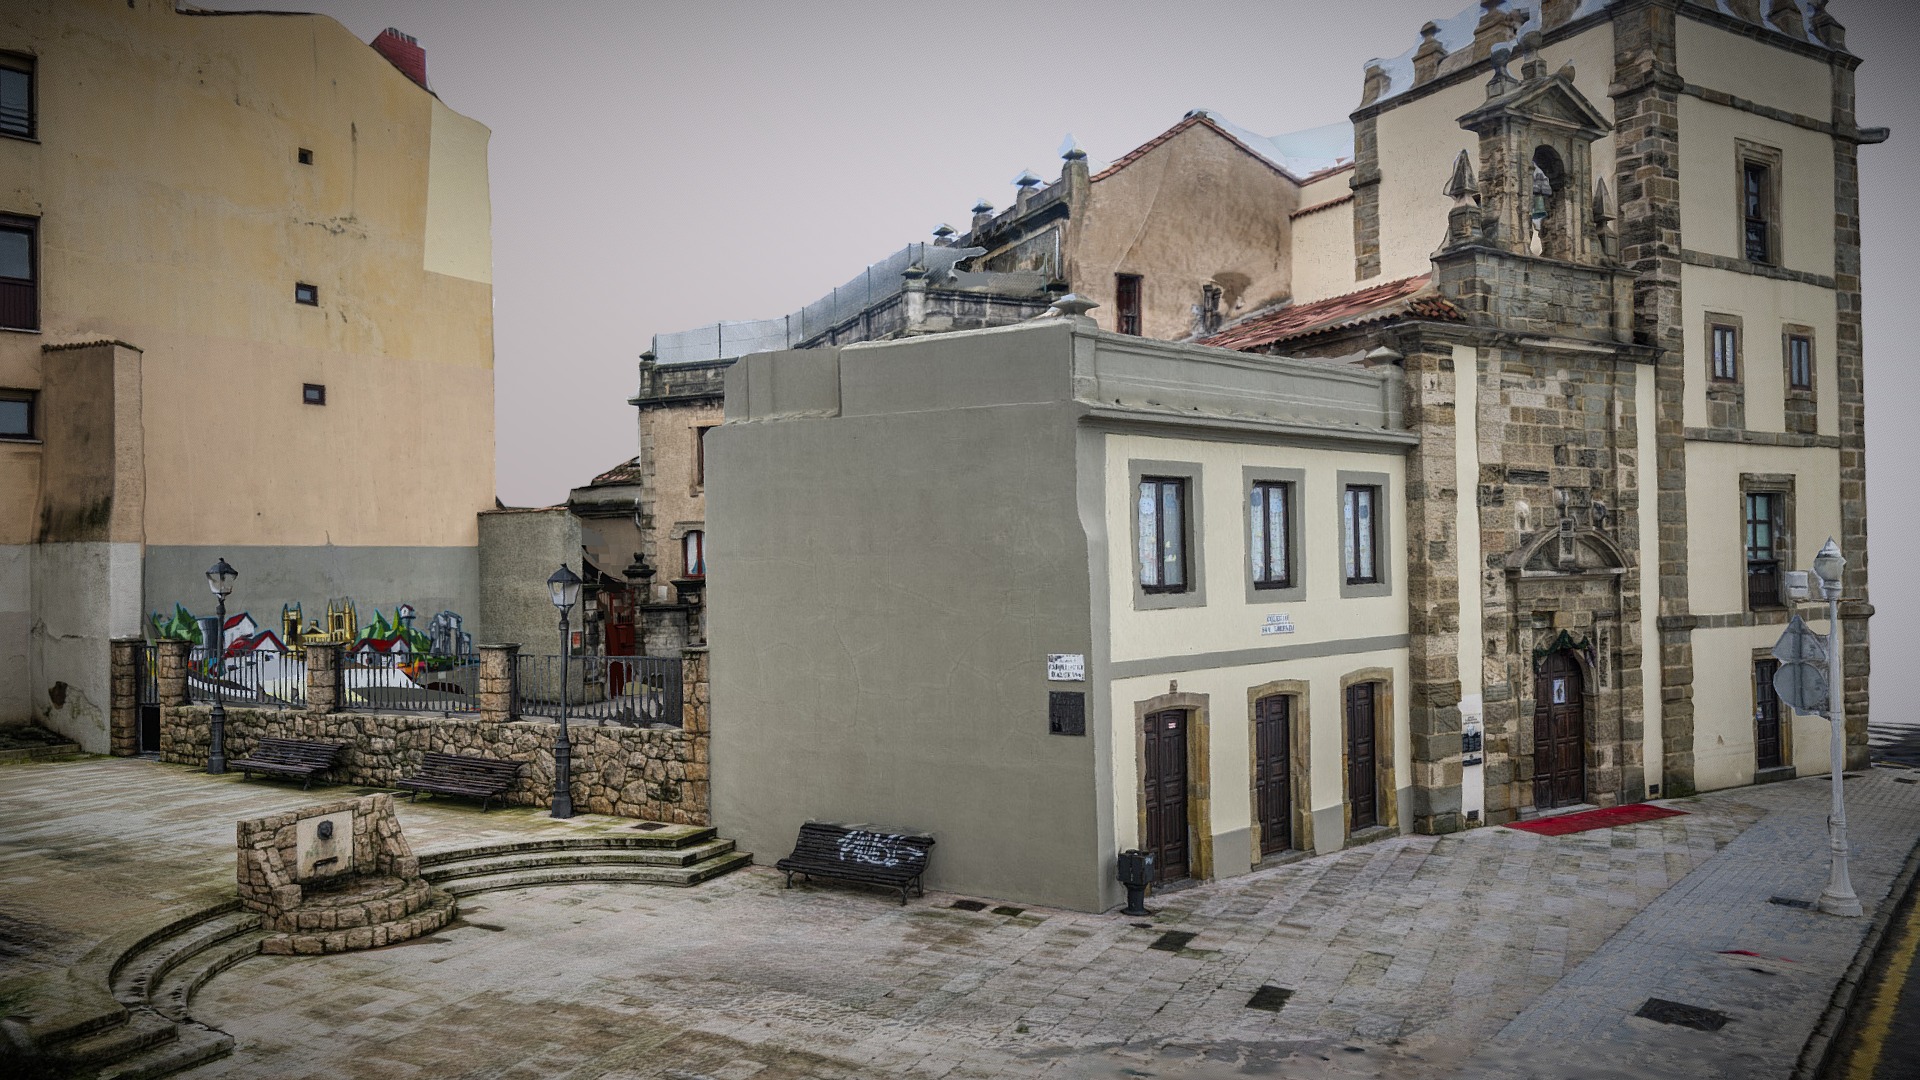 3D model Jove-Hevia tower raw photogrammetry scan - This is a 3D model of the Jove-Hevia tower raw photogrammetry scan. The 3D model is about a stone courtyard with buildings around it.